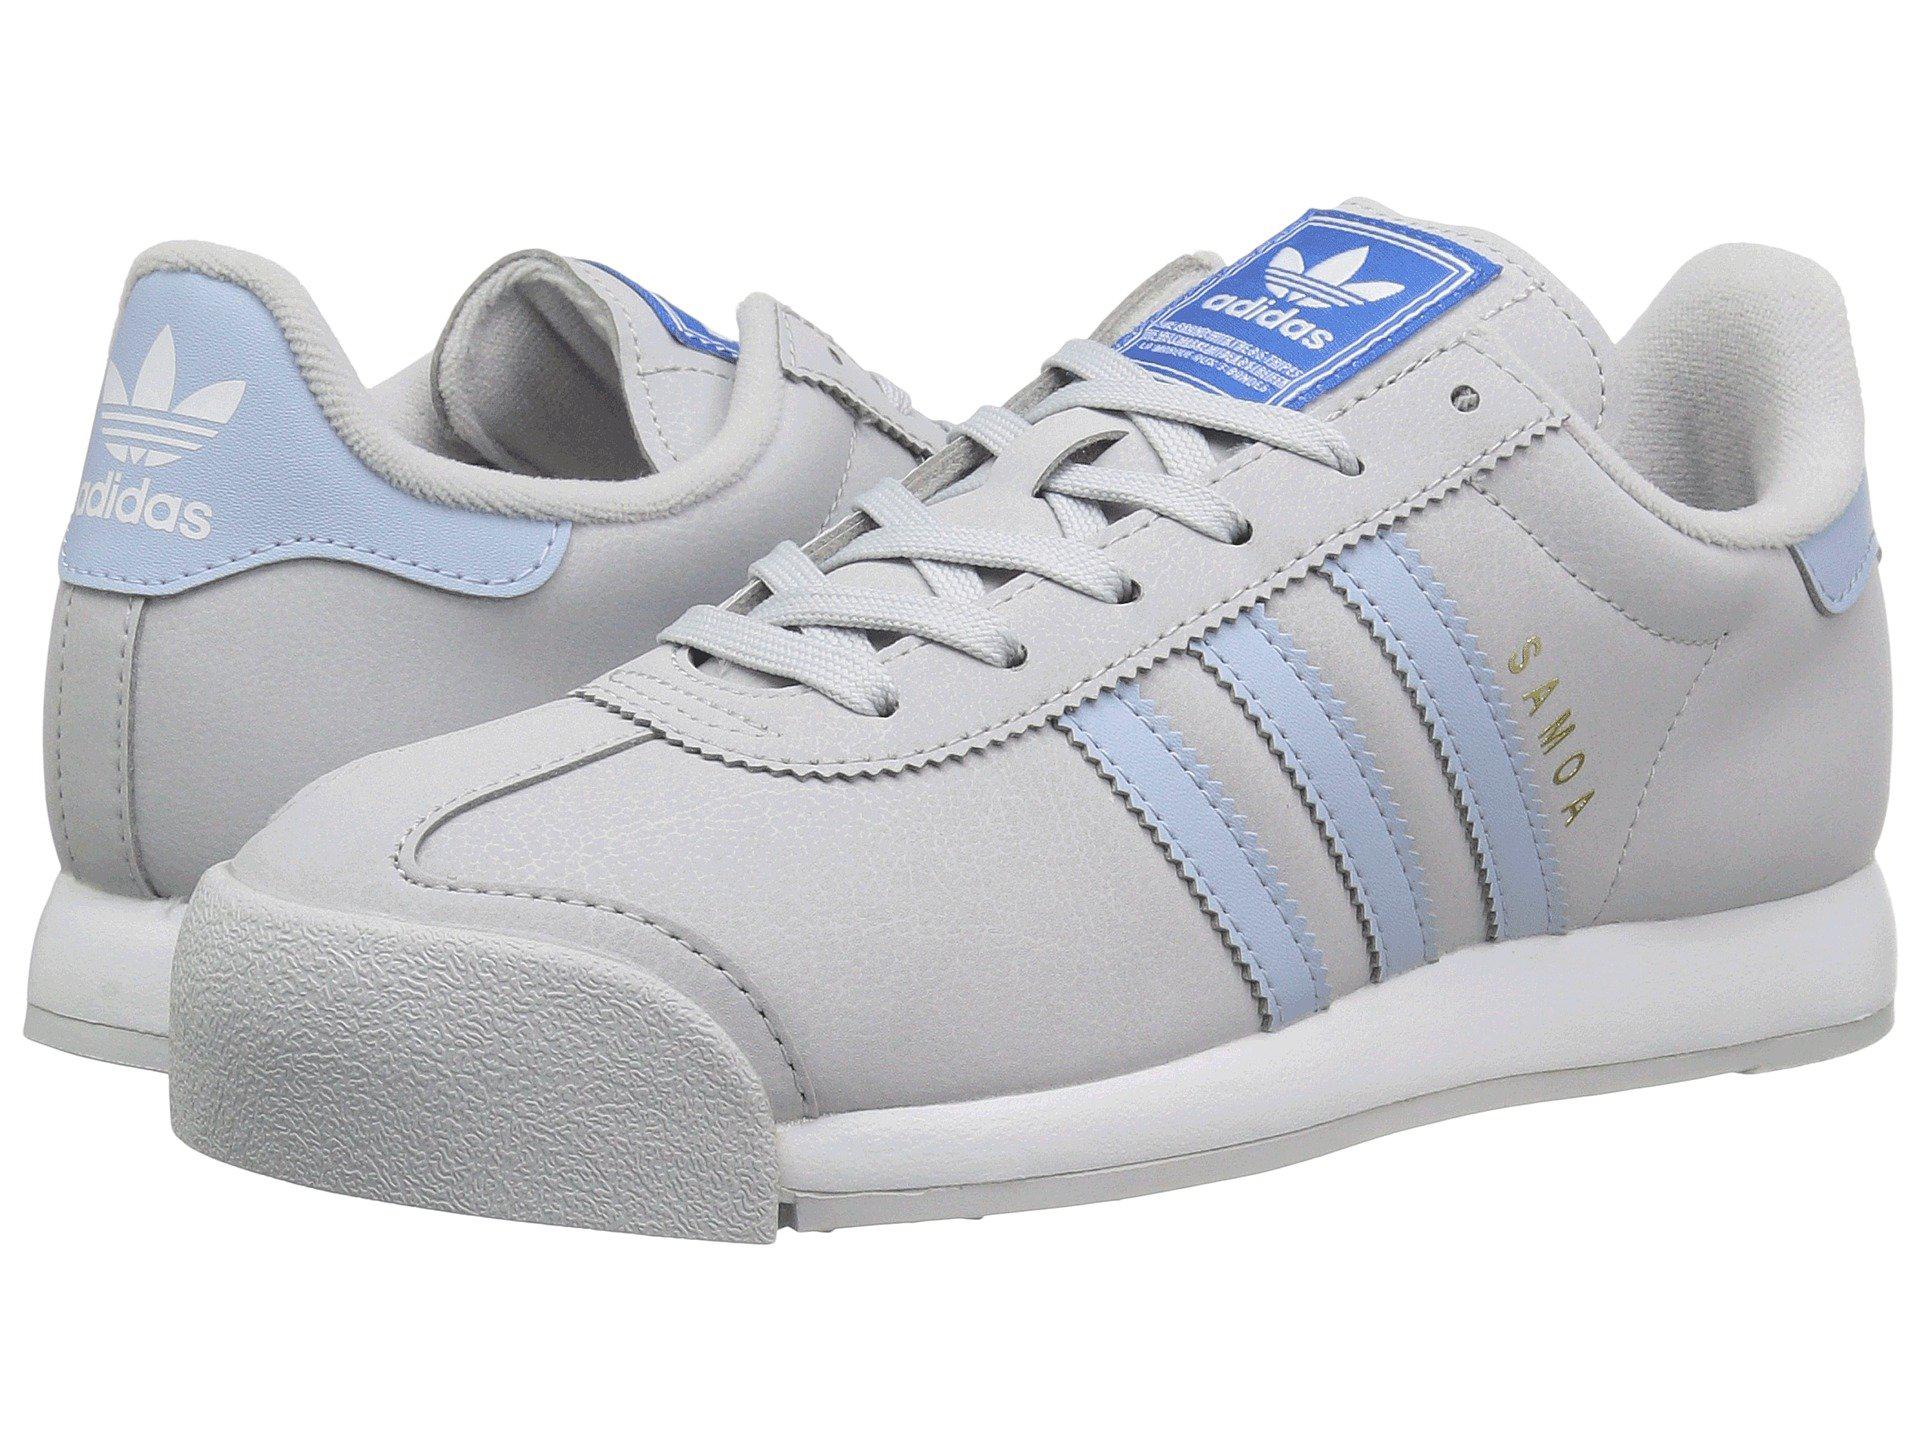 adidas Originals Samoa (light Grey Heather Solid Grey/easy Blue/footwear  White) Women's Classic Shoes in Gray | Lyst